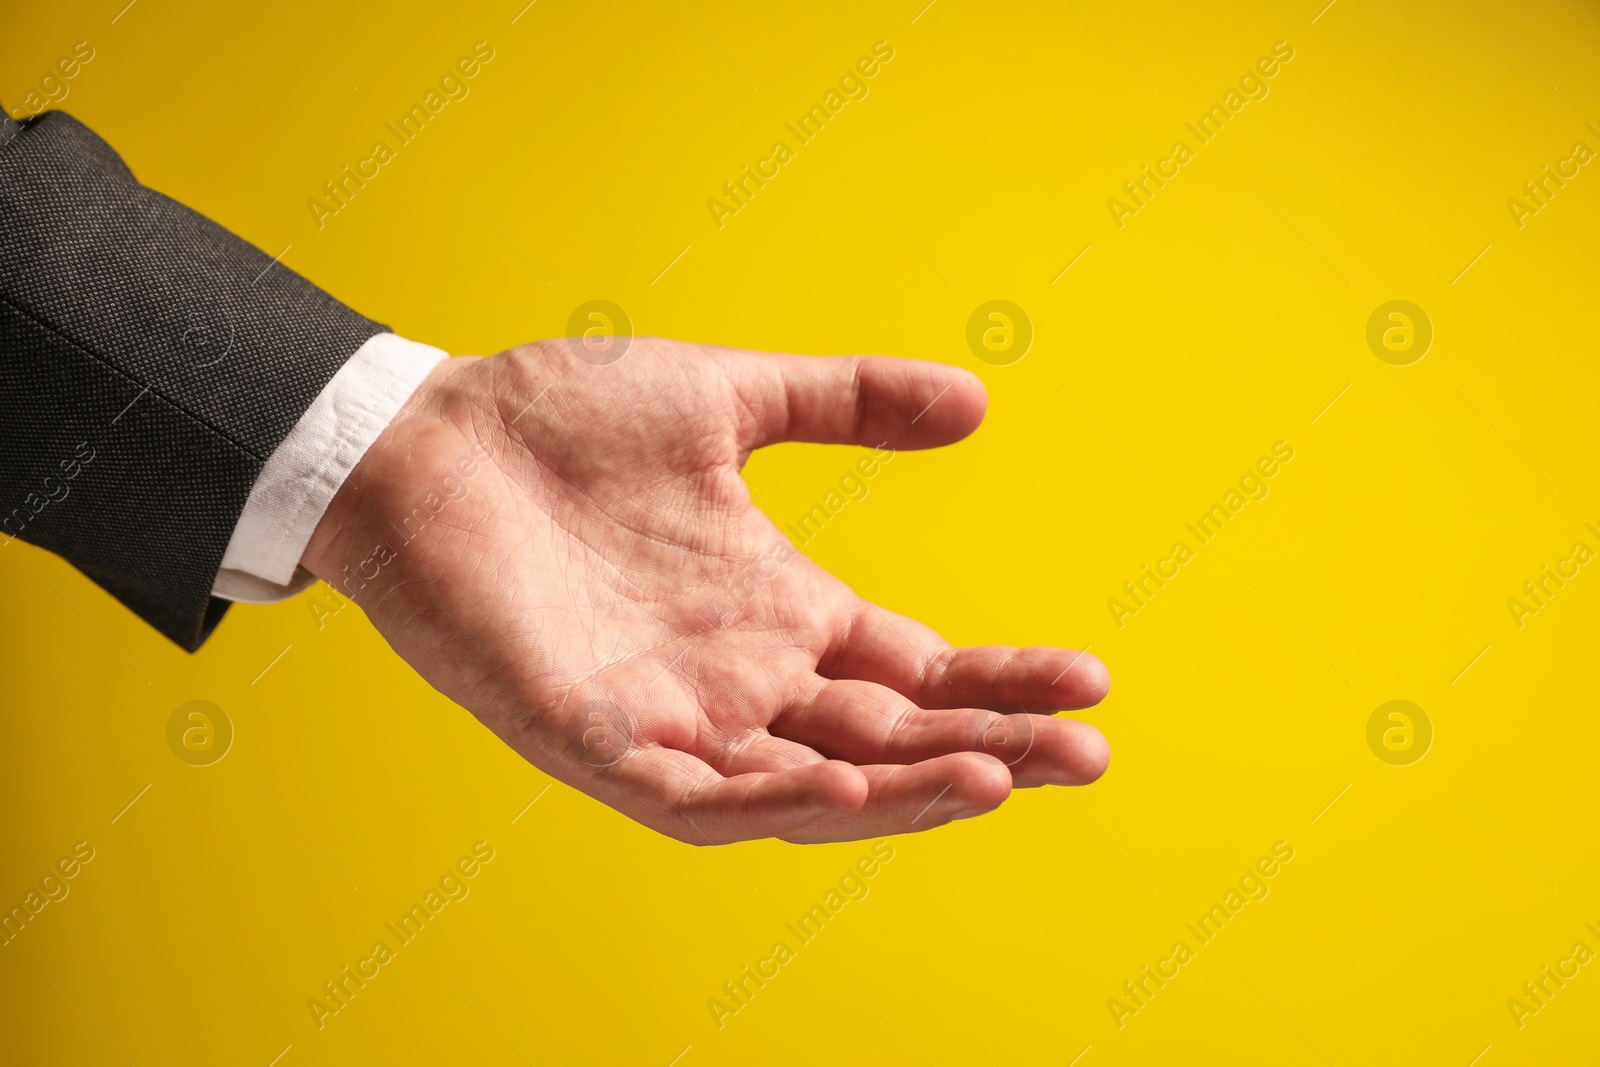 Photo of Man holding something in hand on yellow background, closeup